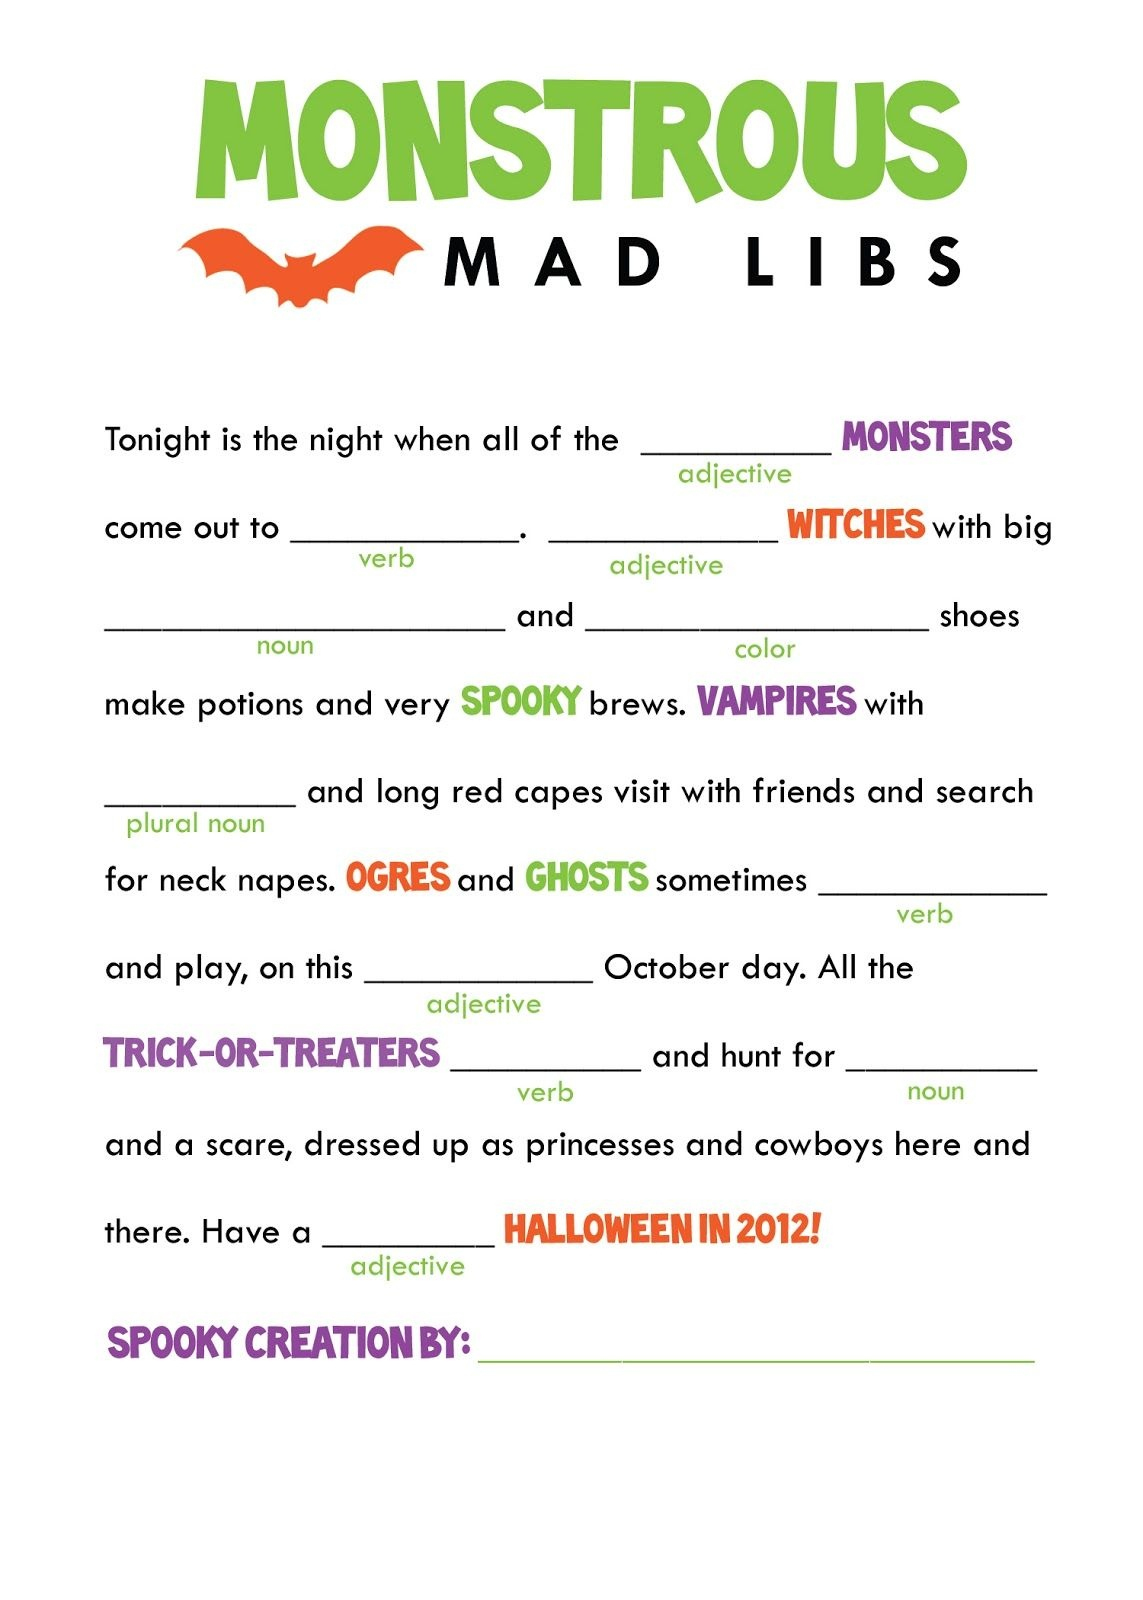 printable-mad-libs-for-high-school-students-education-assessed